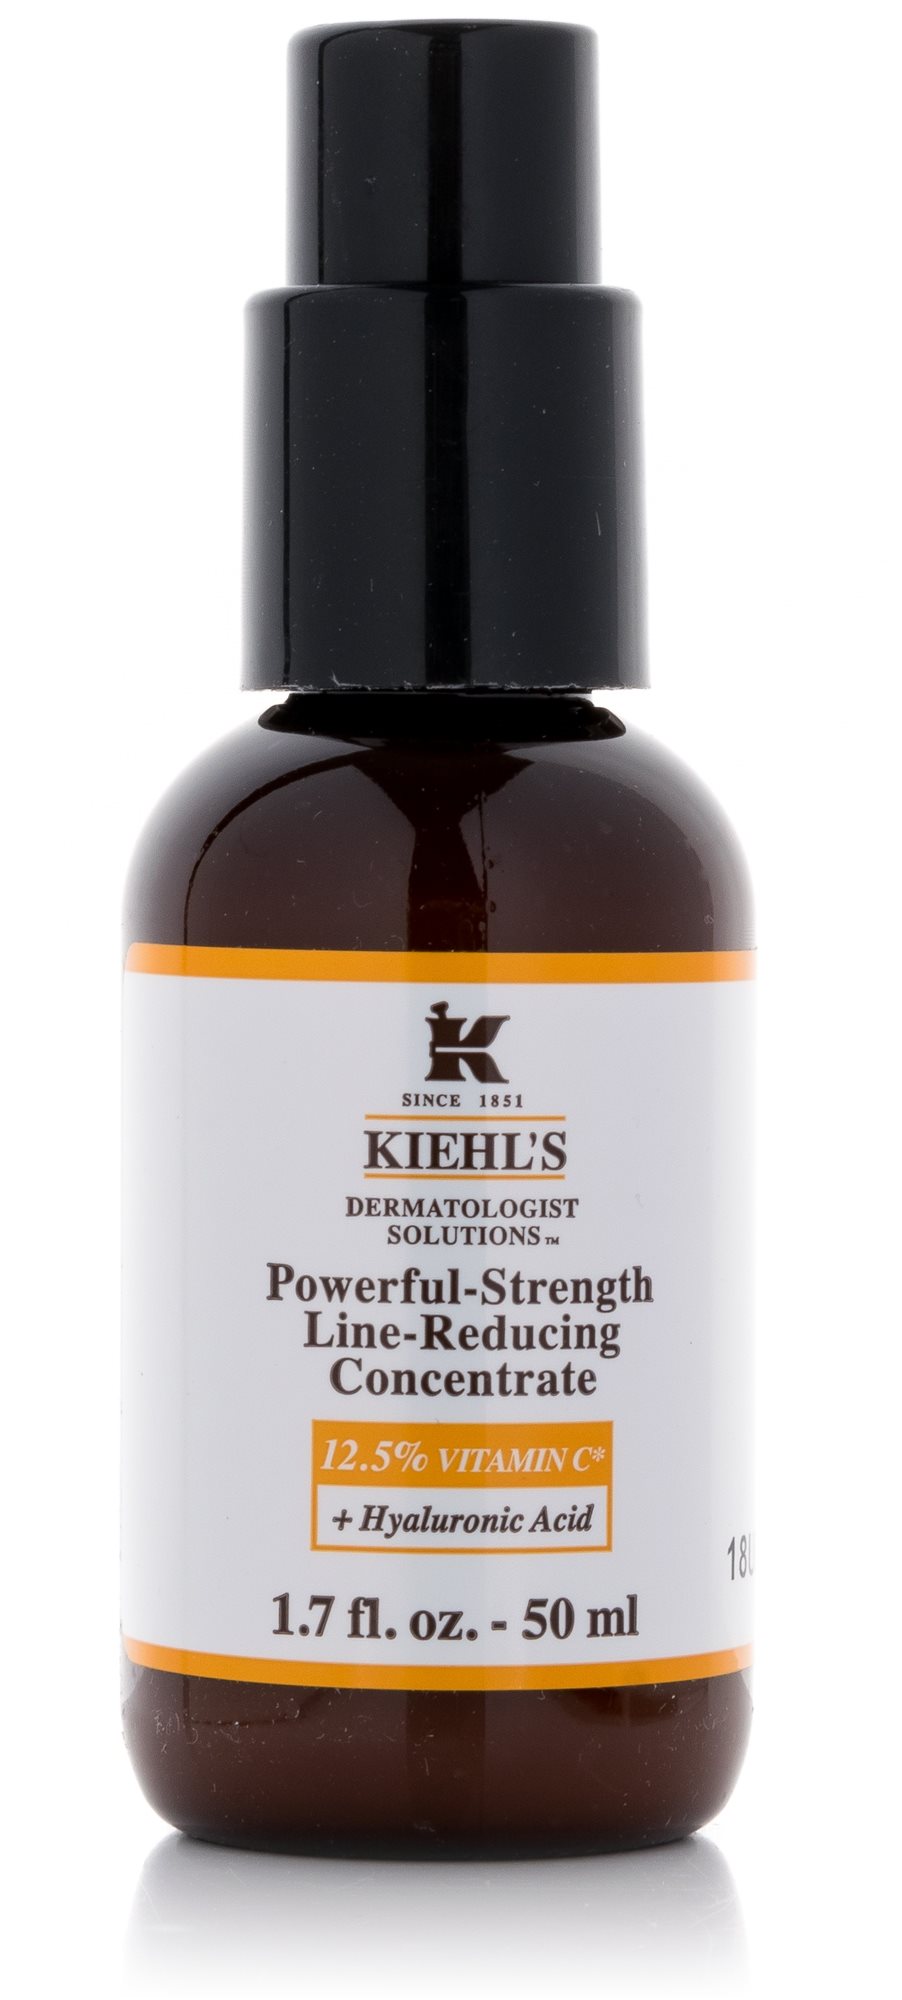 KIEHL'S Powerful-Strength Line-Reducing Concentrate 50 ml